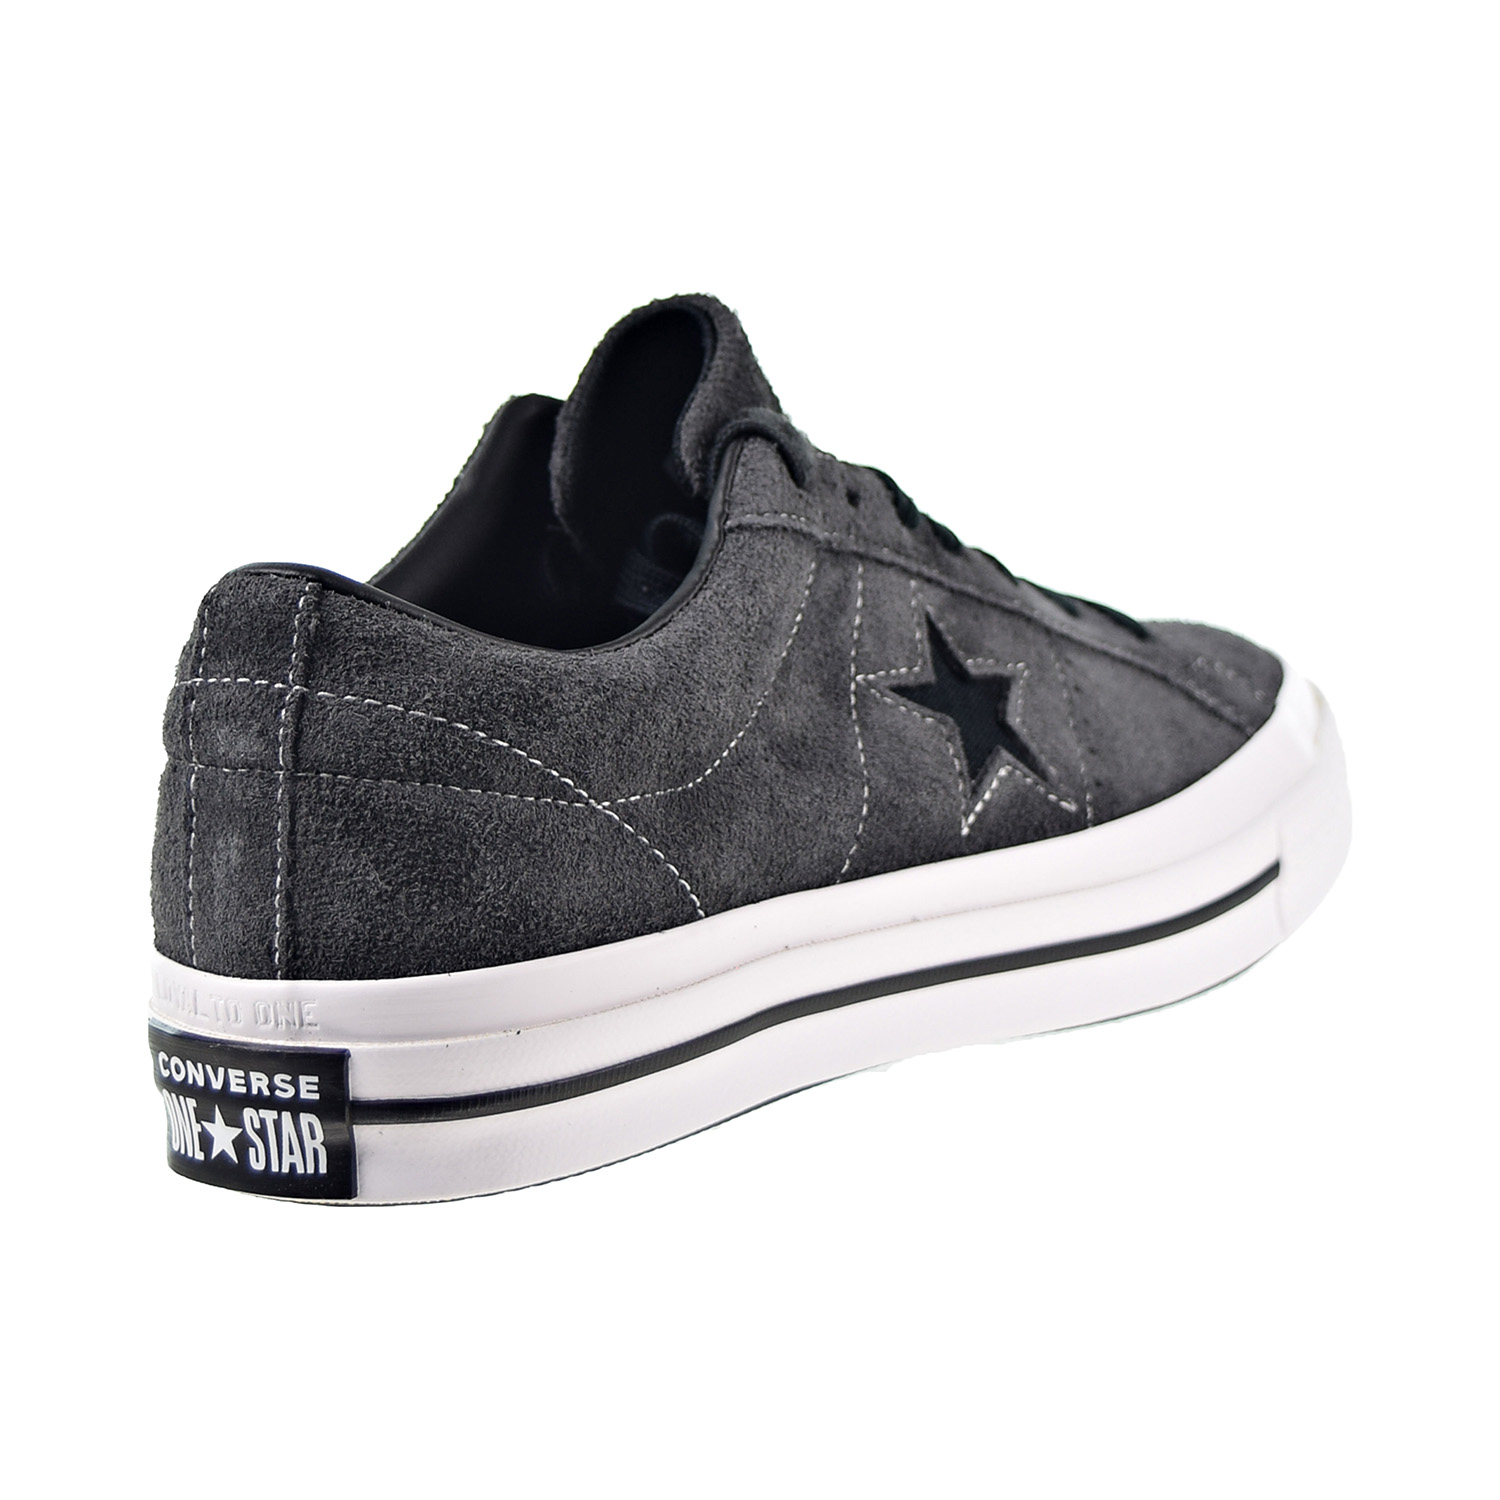 Converse One Star Ox Men's Shoes Almost Black-Black-White 163247c - image 2 of 6